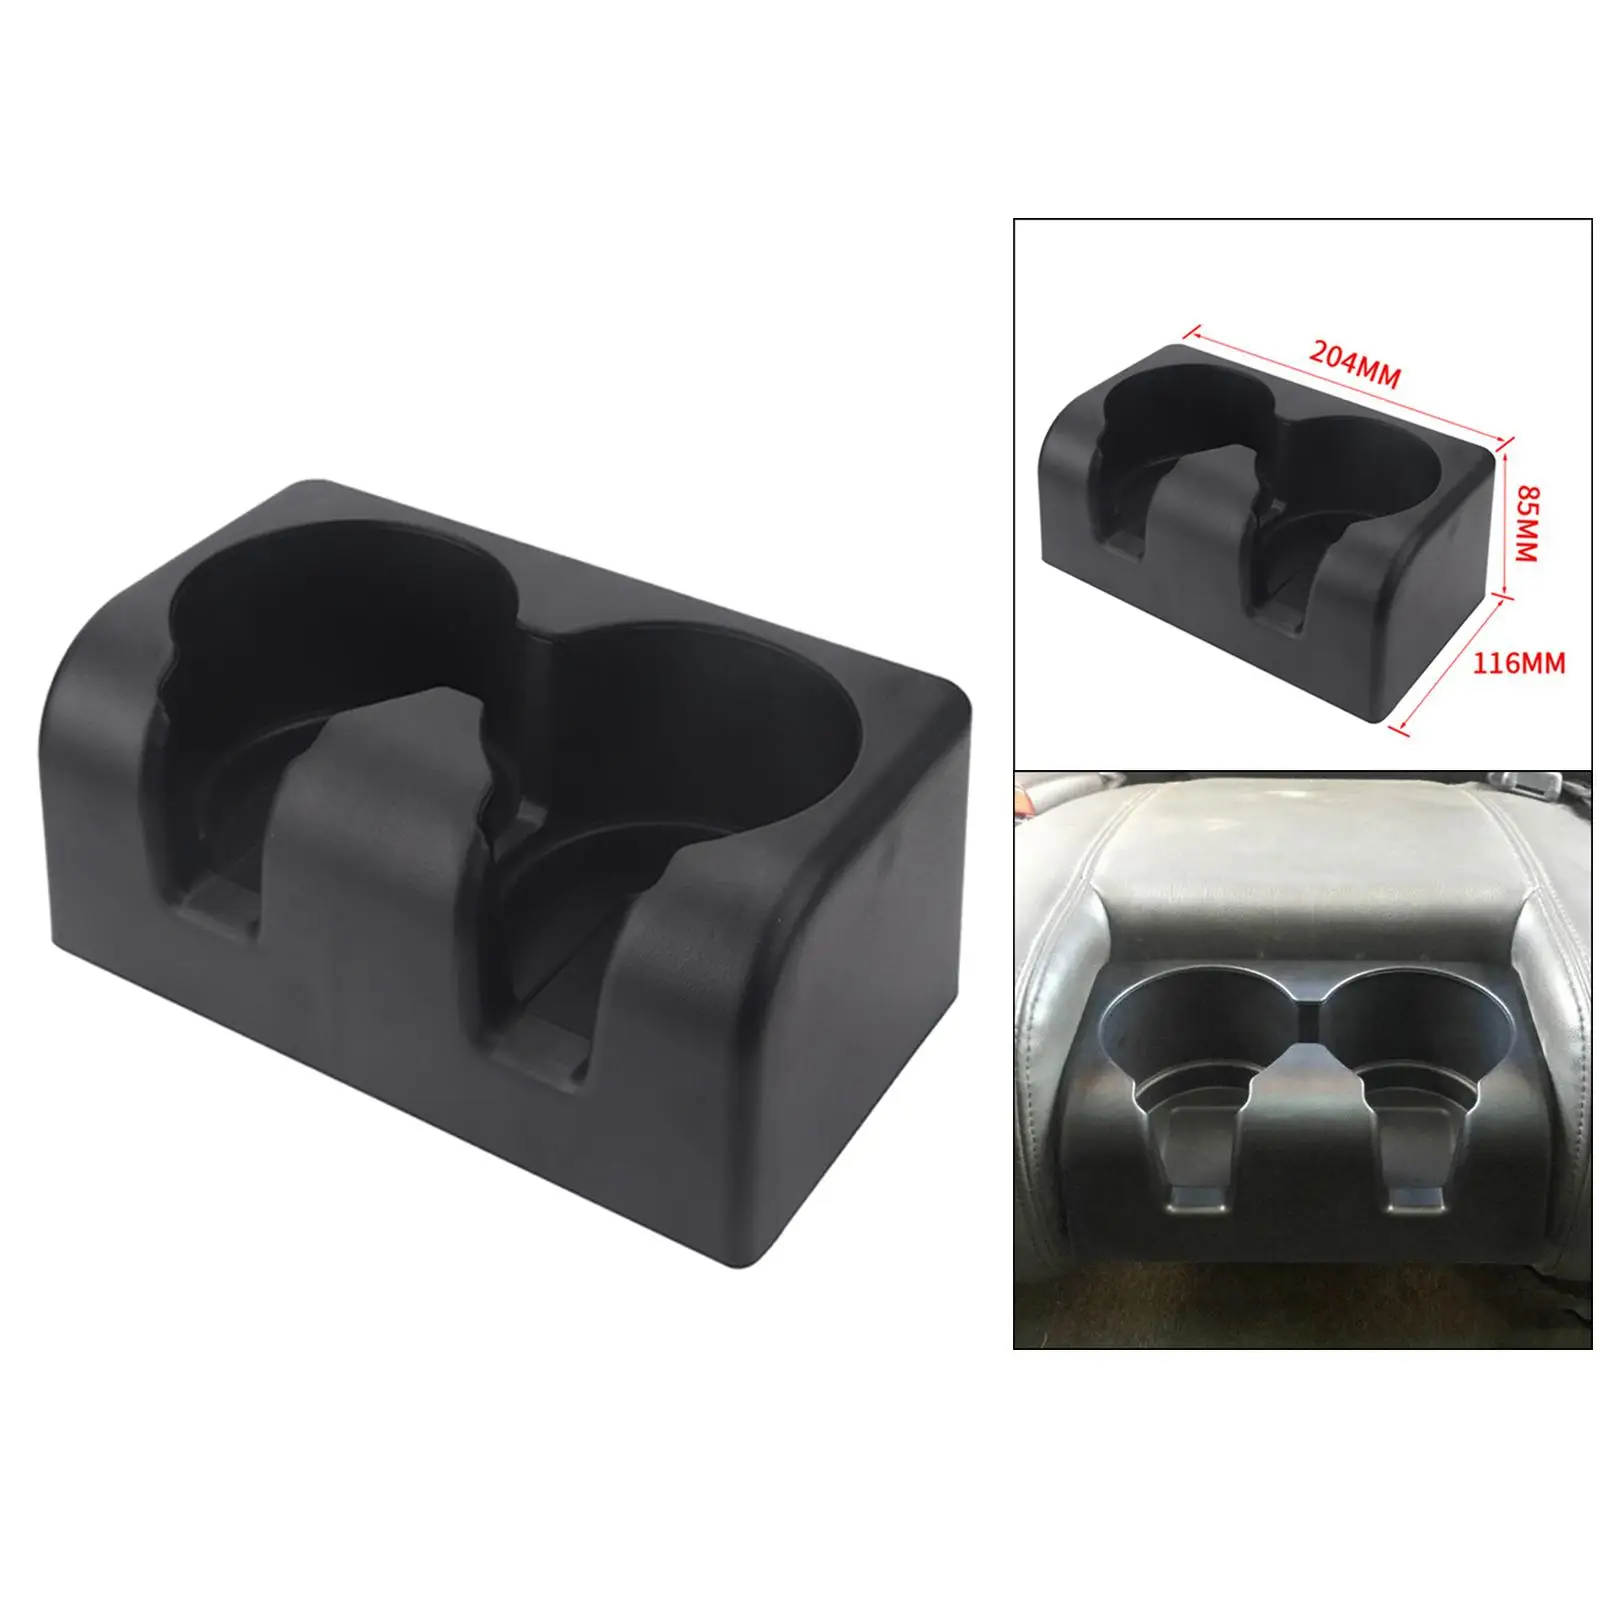 Rear Center Console Insert Dual Cup Holder Double Storage for Colorado for Canyon 2004-12 19256630 89039575 Interior Decoration